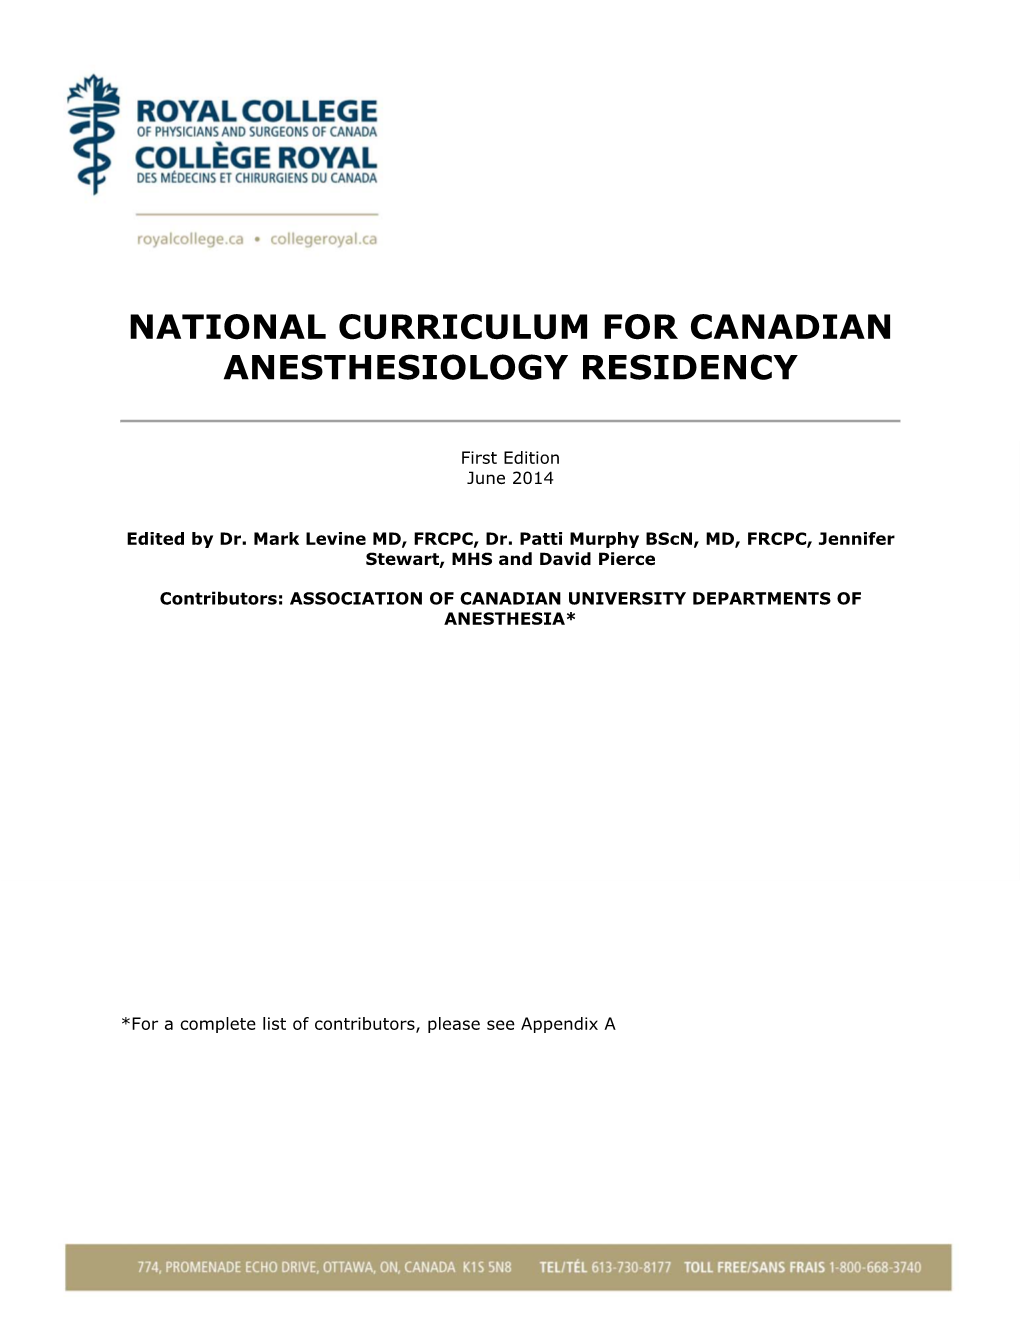 National Curriculum for Canadian Anesthesiology